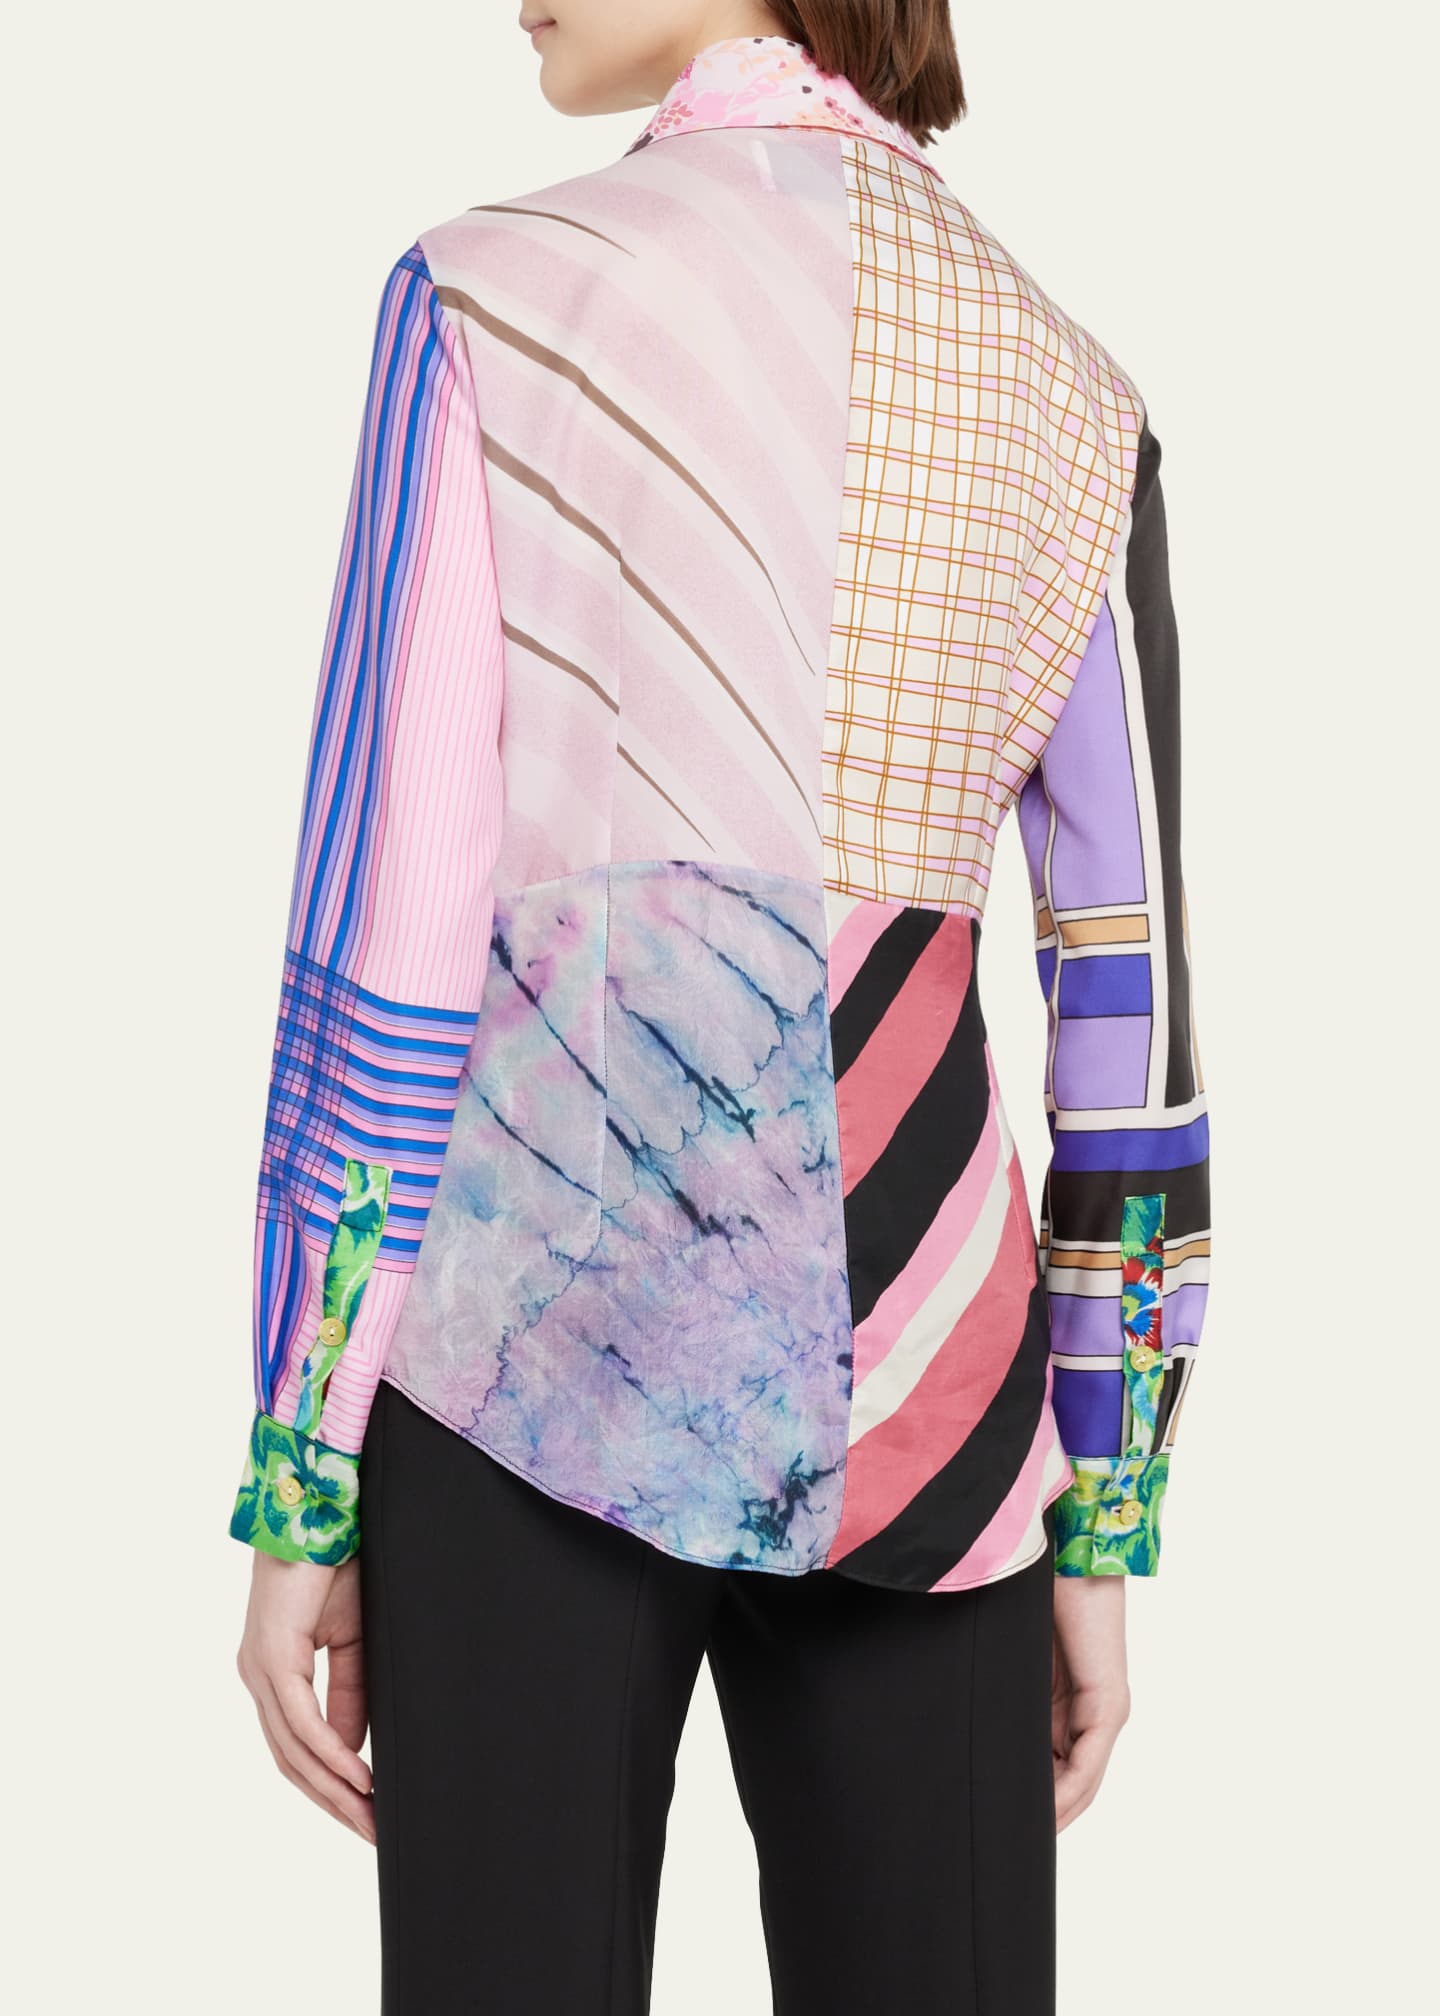 CONNER IVES Patchwork Upcycled Scarf Silk Blouse - Bergdorf Goodman